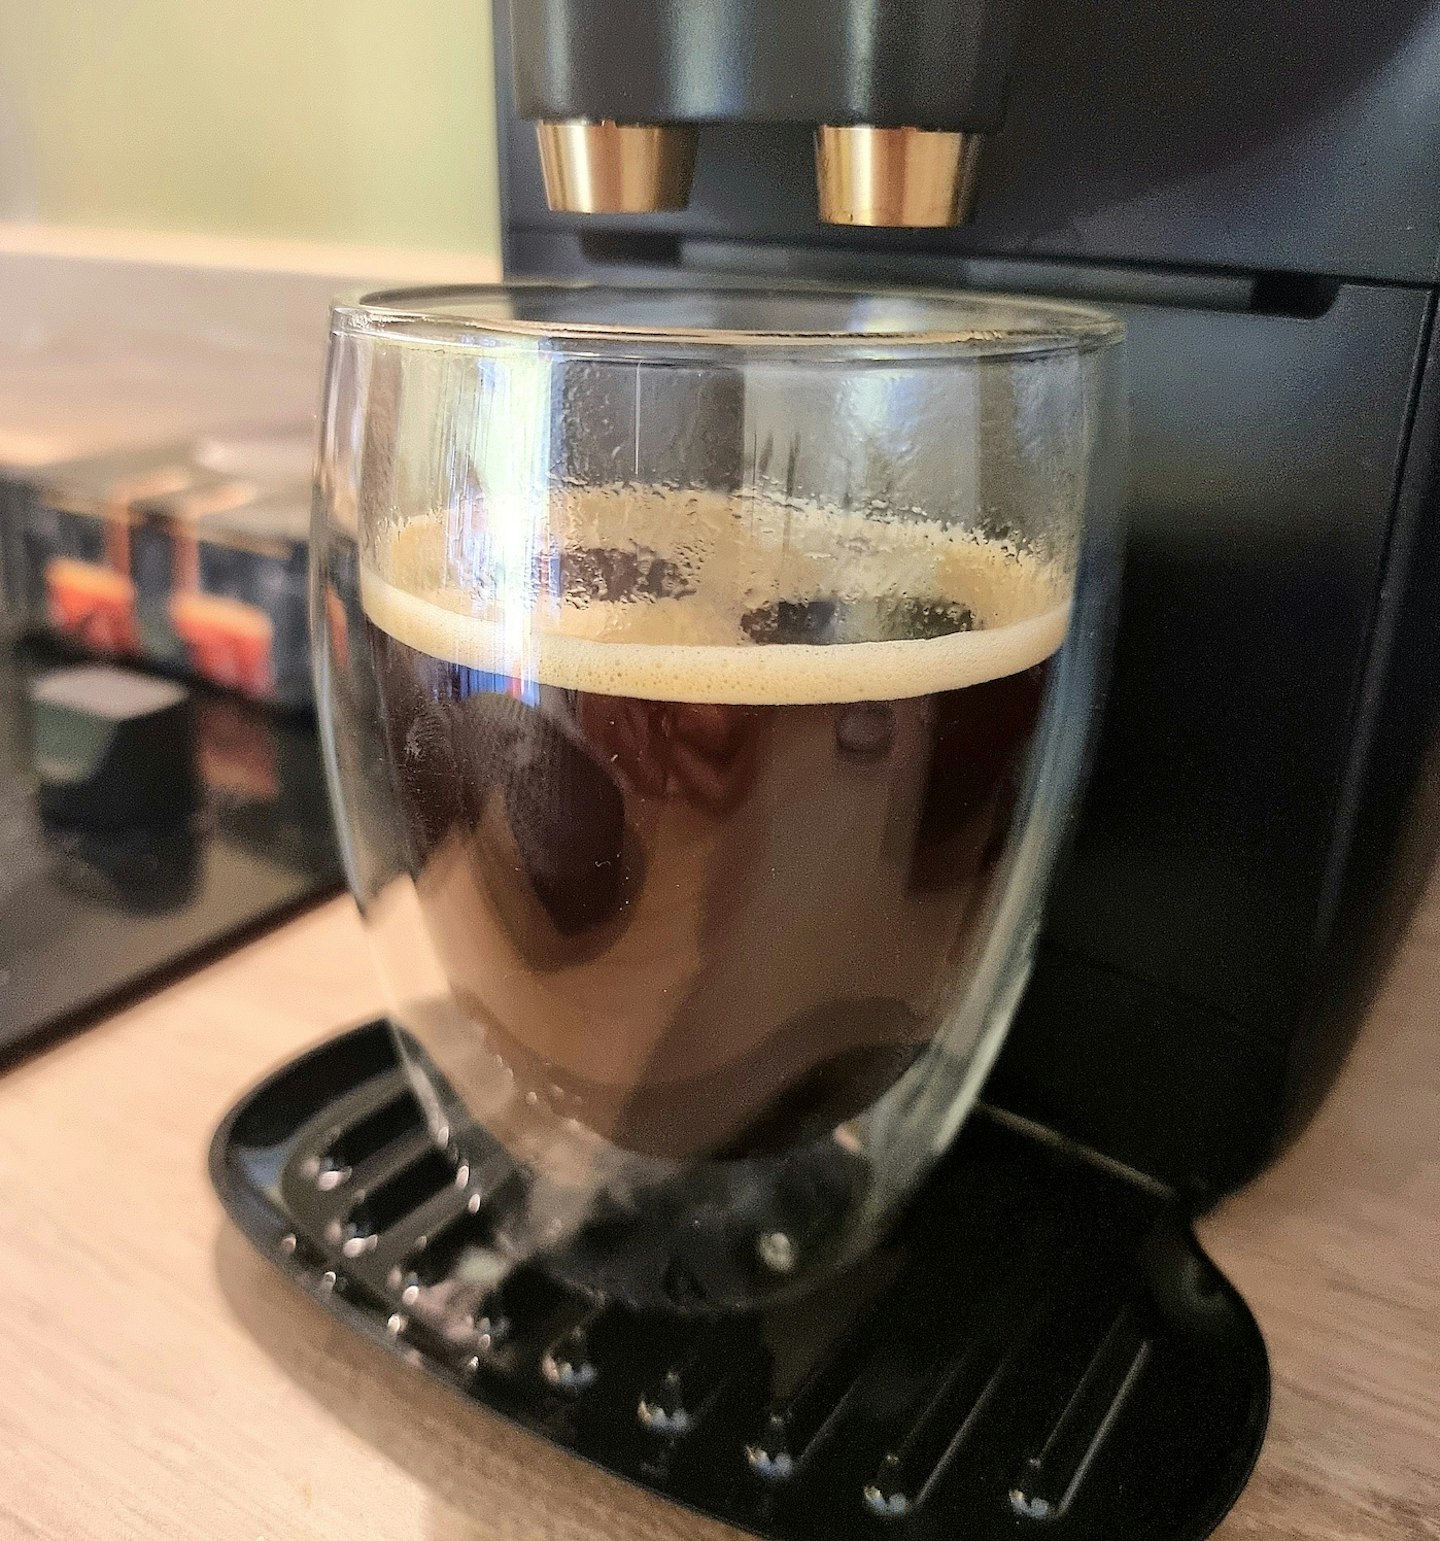 How to set up and use your L'OR BARISTA Original & Sublime